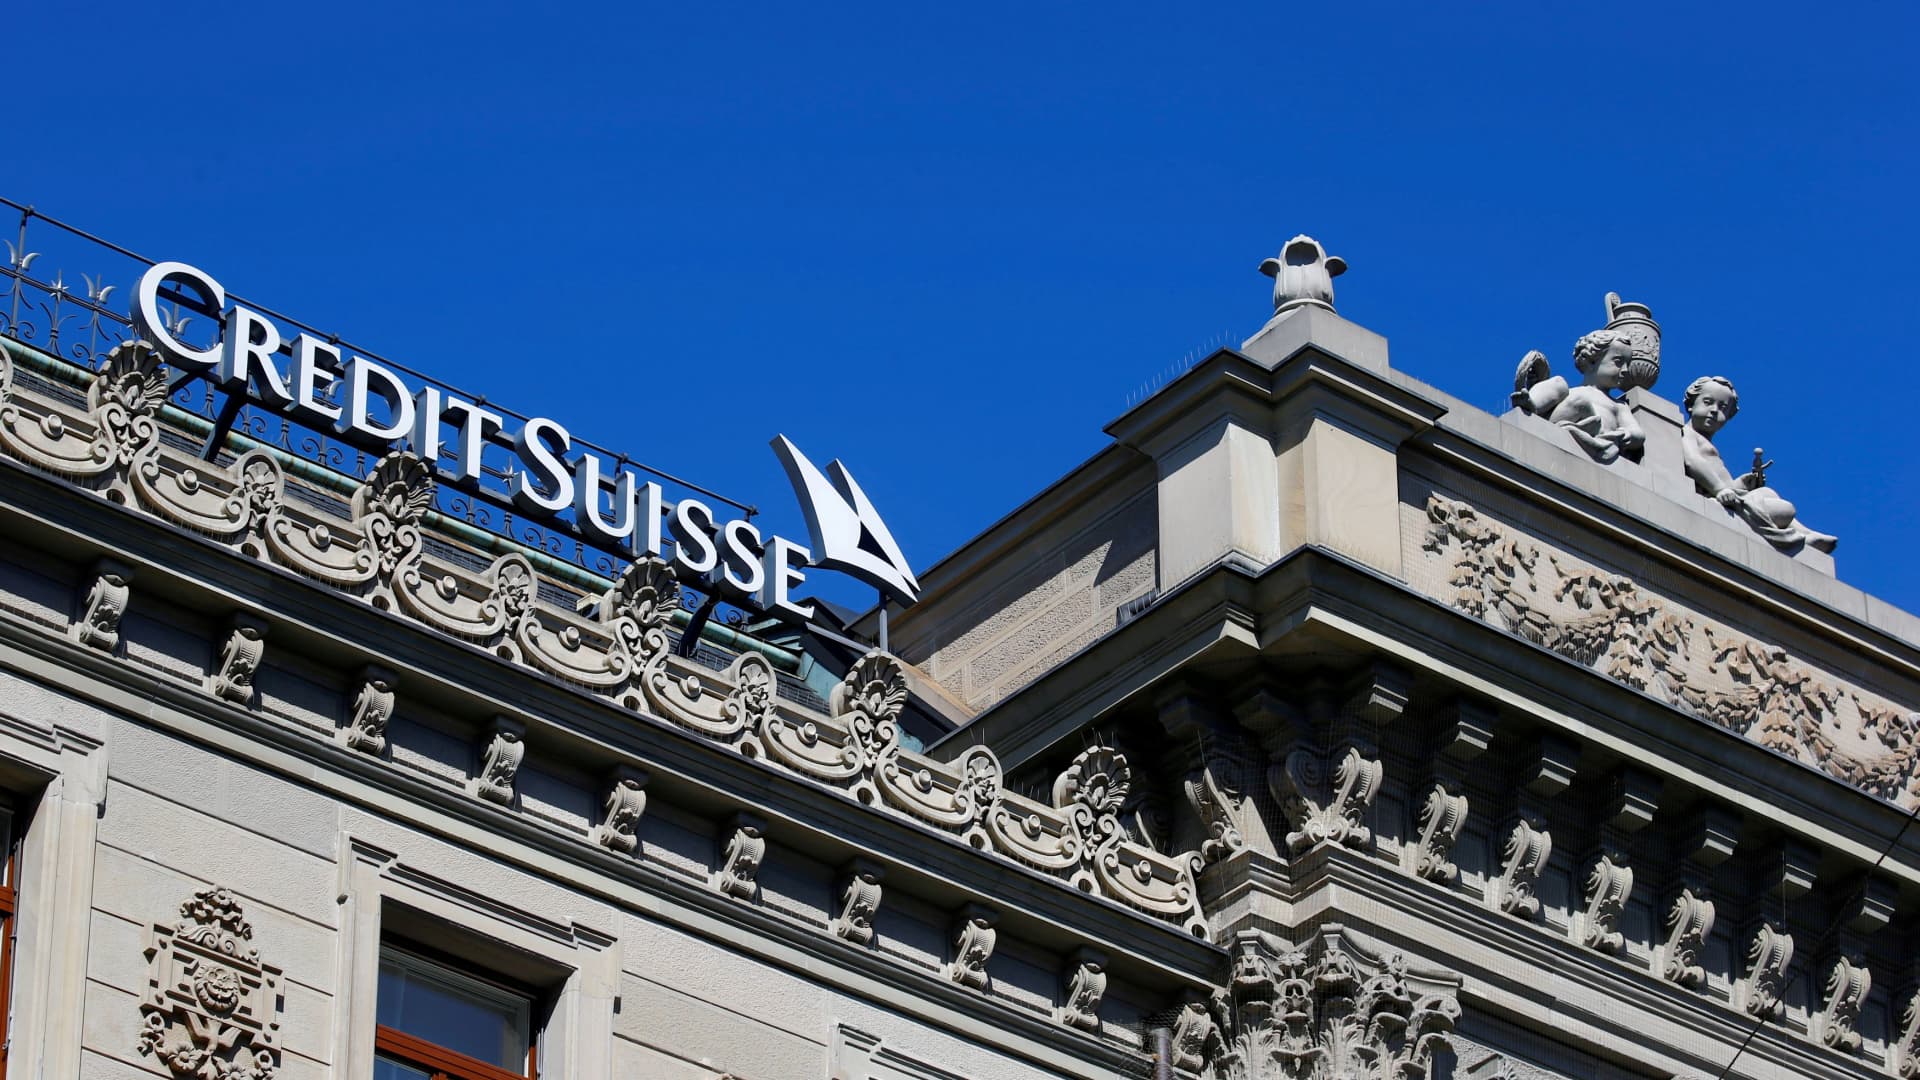 Credit Suisse names Ulrich Koerner as CEO, launches strategic review as losses deepen